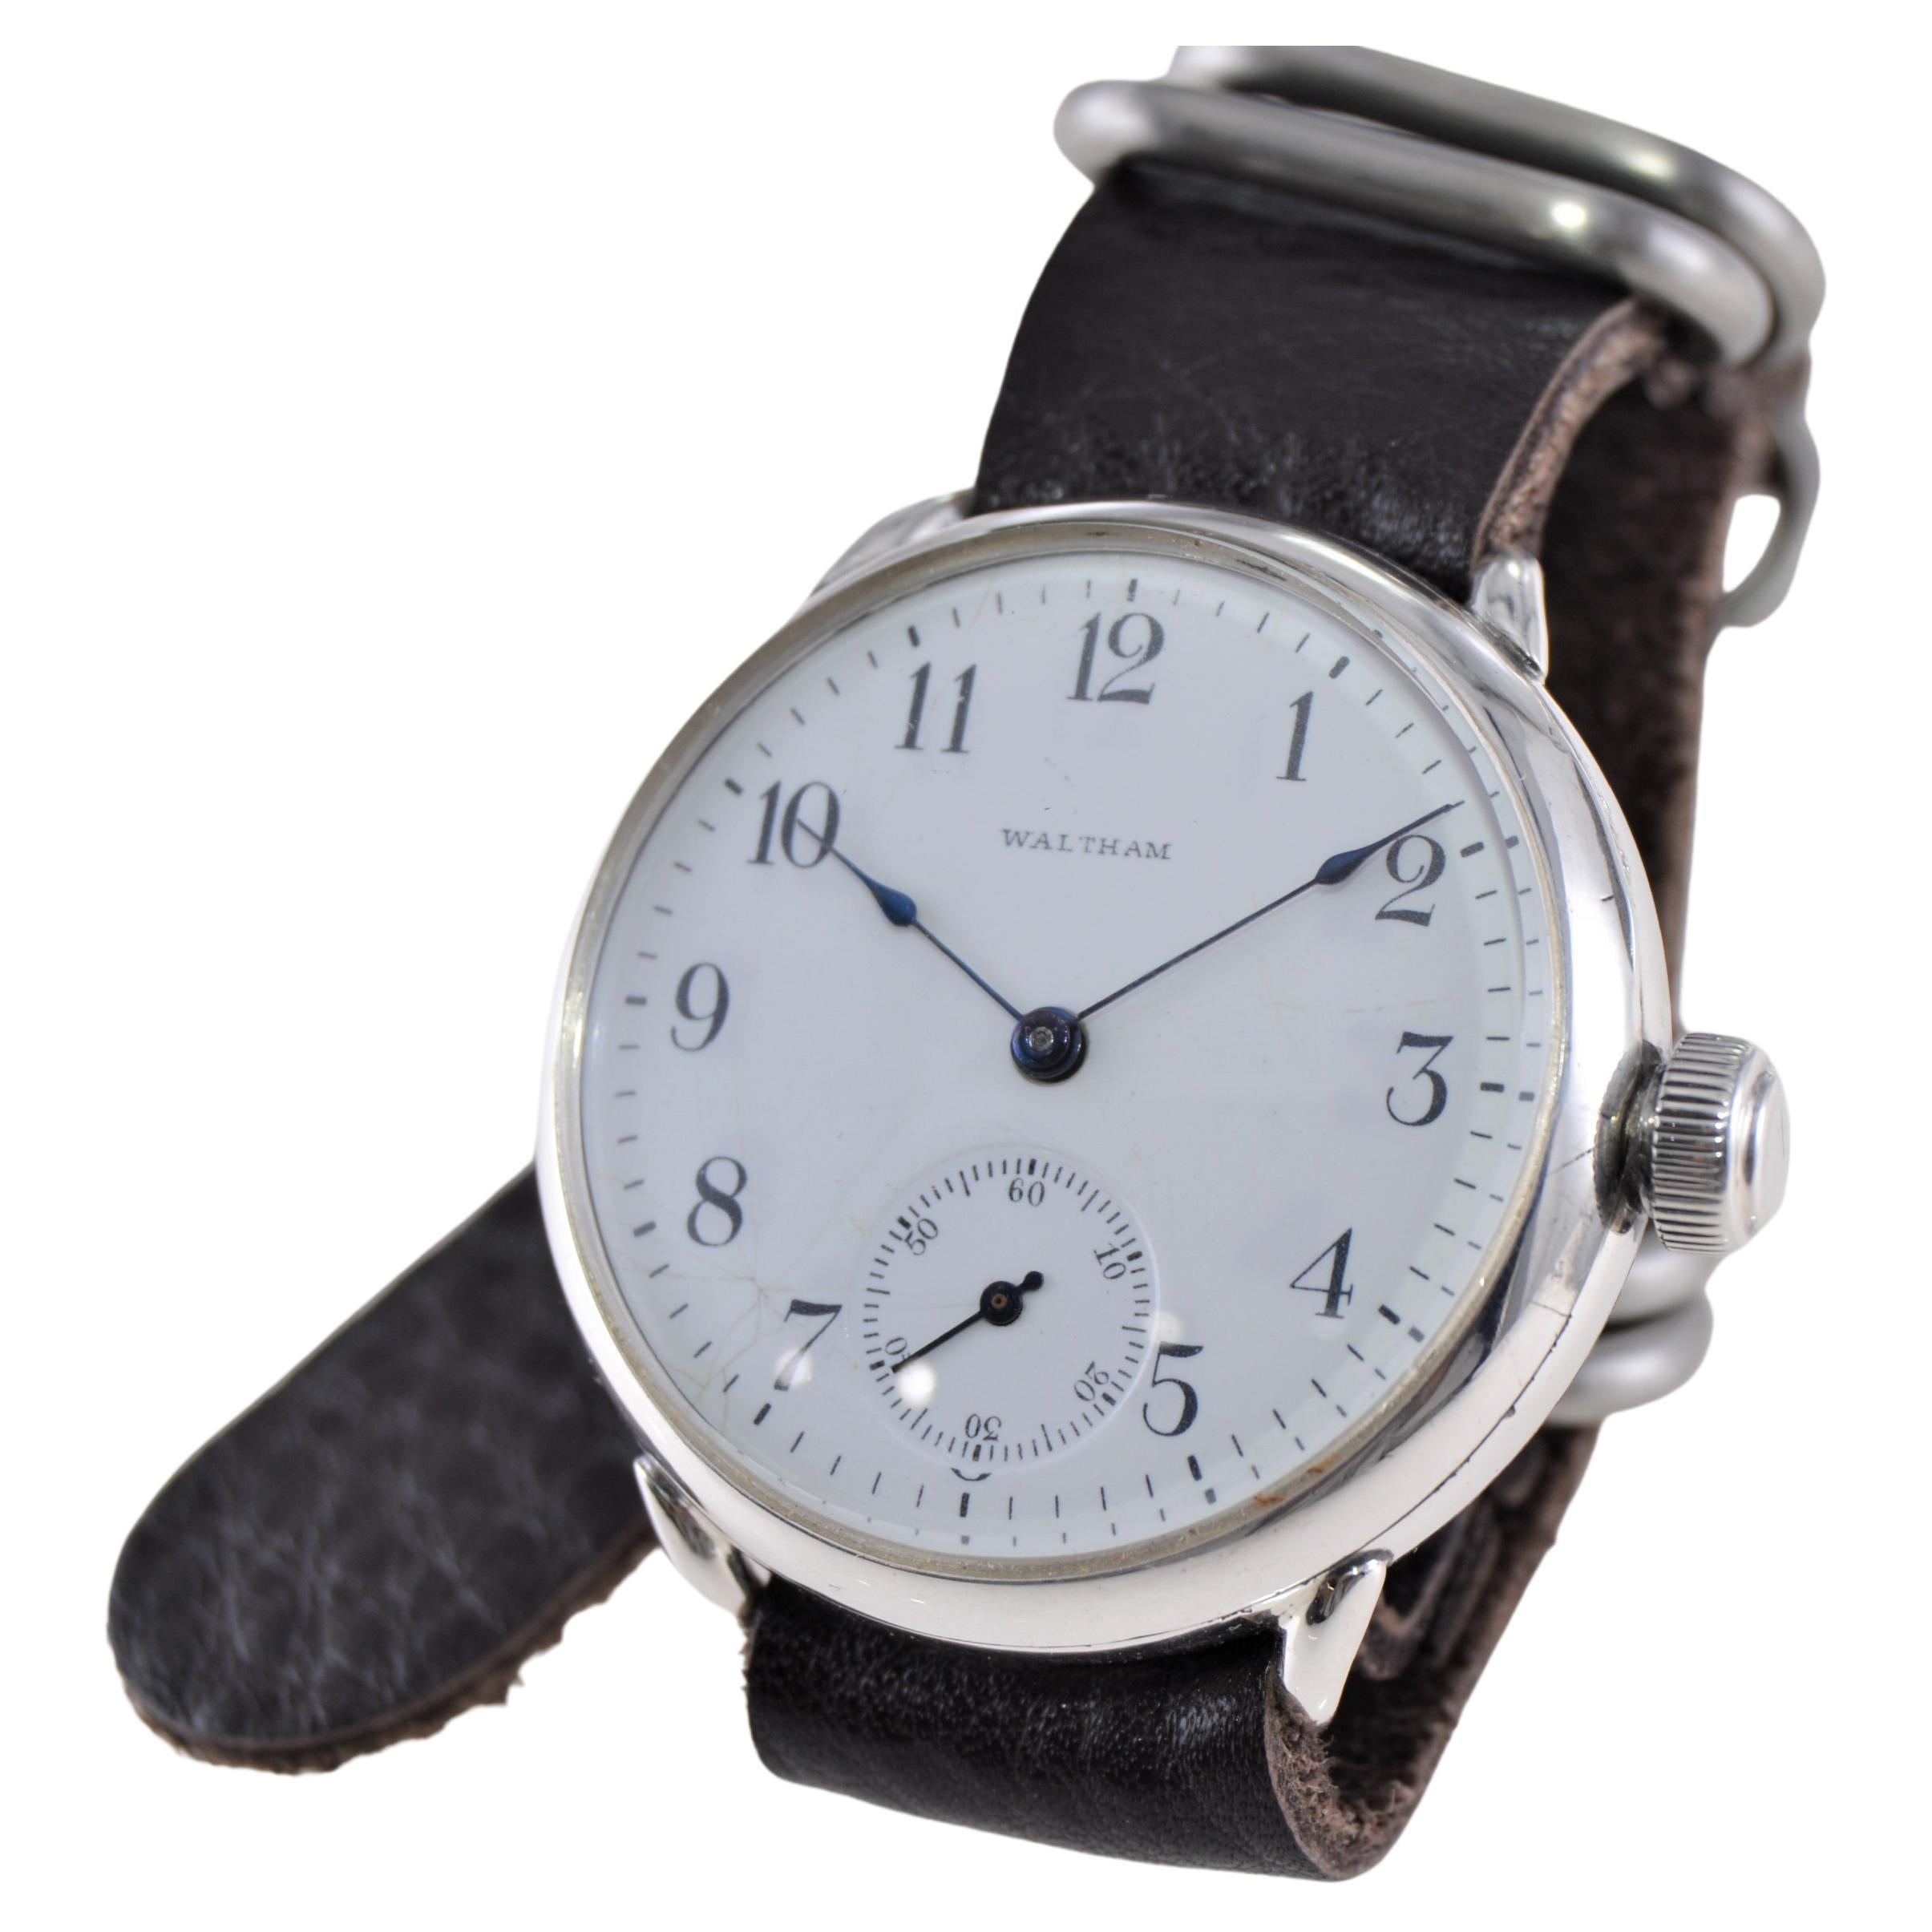 Women's or Men's Waltham Sterling Silver Campaign Style Watch from 1901 with Original Enamel Dial